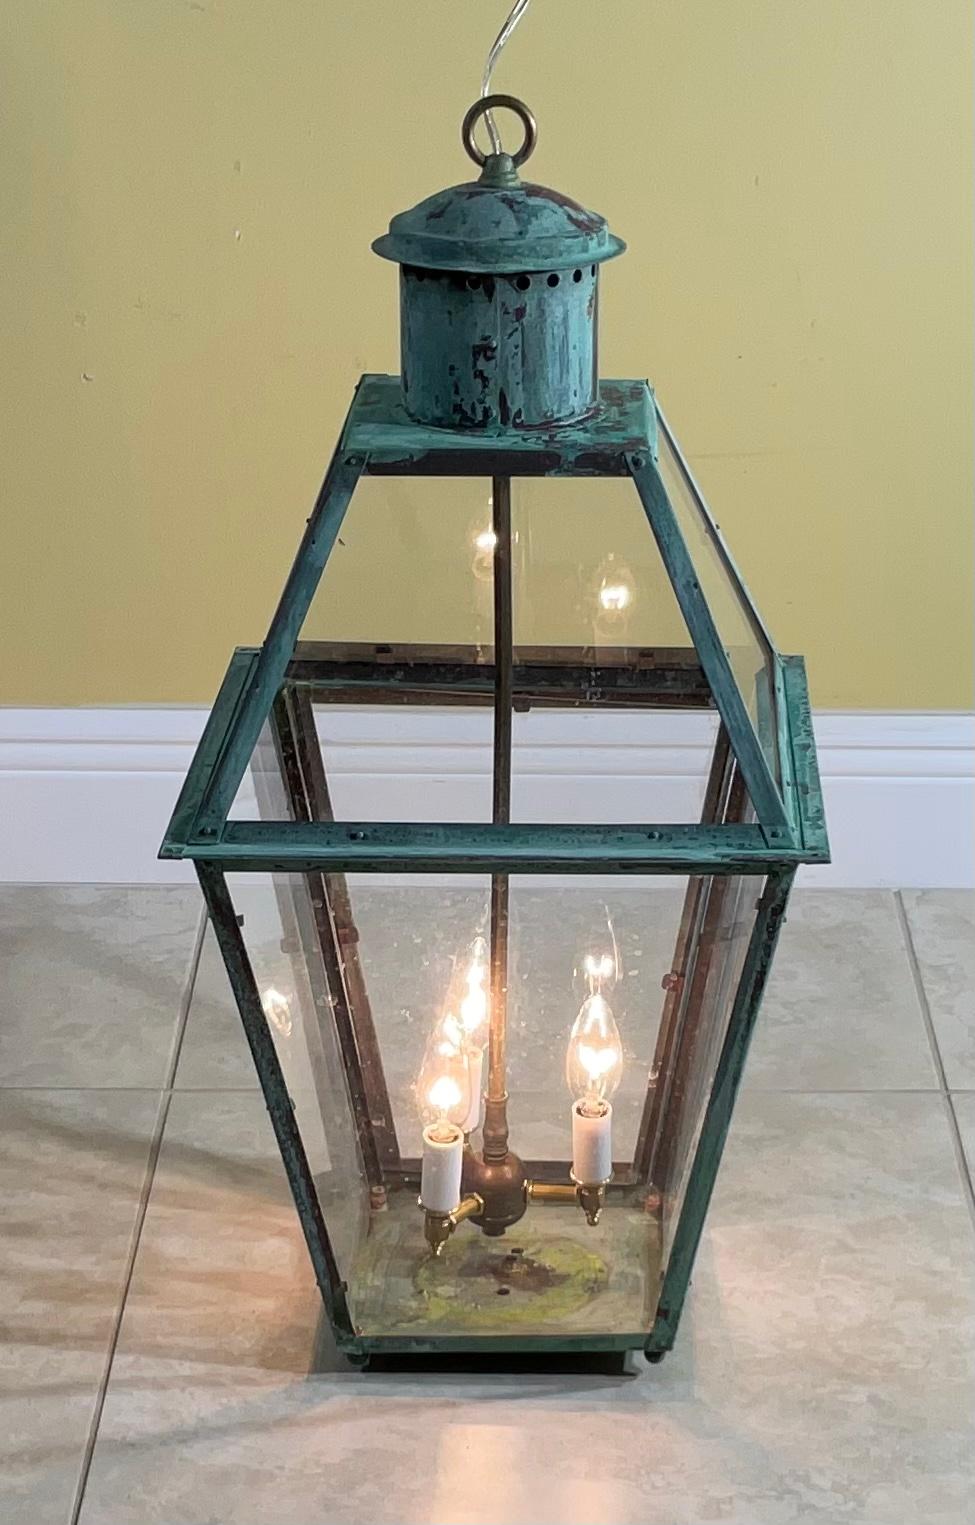 Vintage Quality handmade solid copper lantern with three 40/watt lights.
Electrified and ready to light. Beautiful oxidization patina.
Could be used in wet location and indoor.
Chain and canopy included.